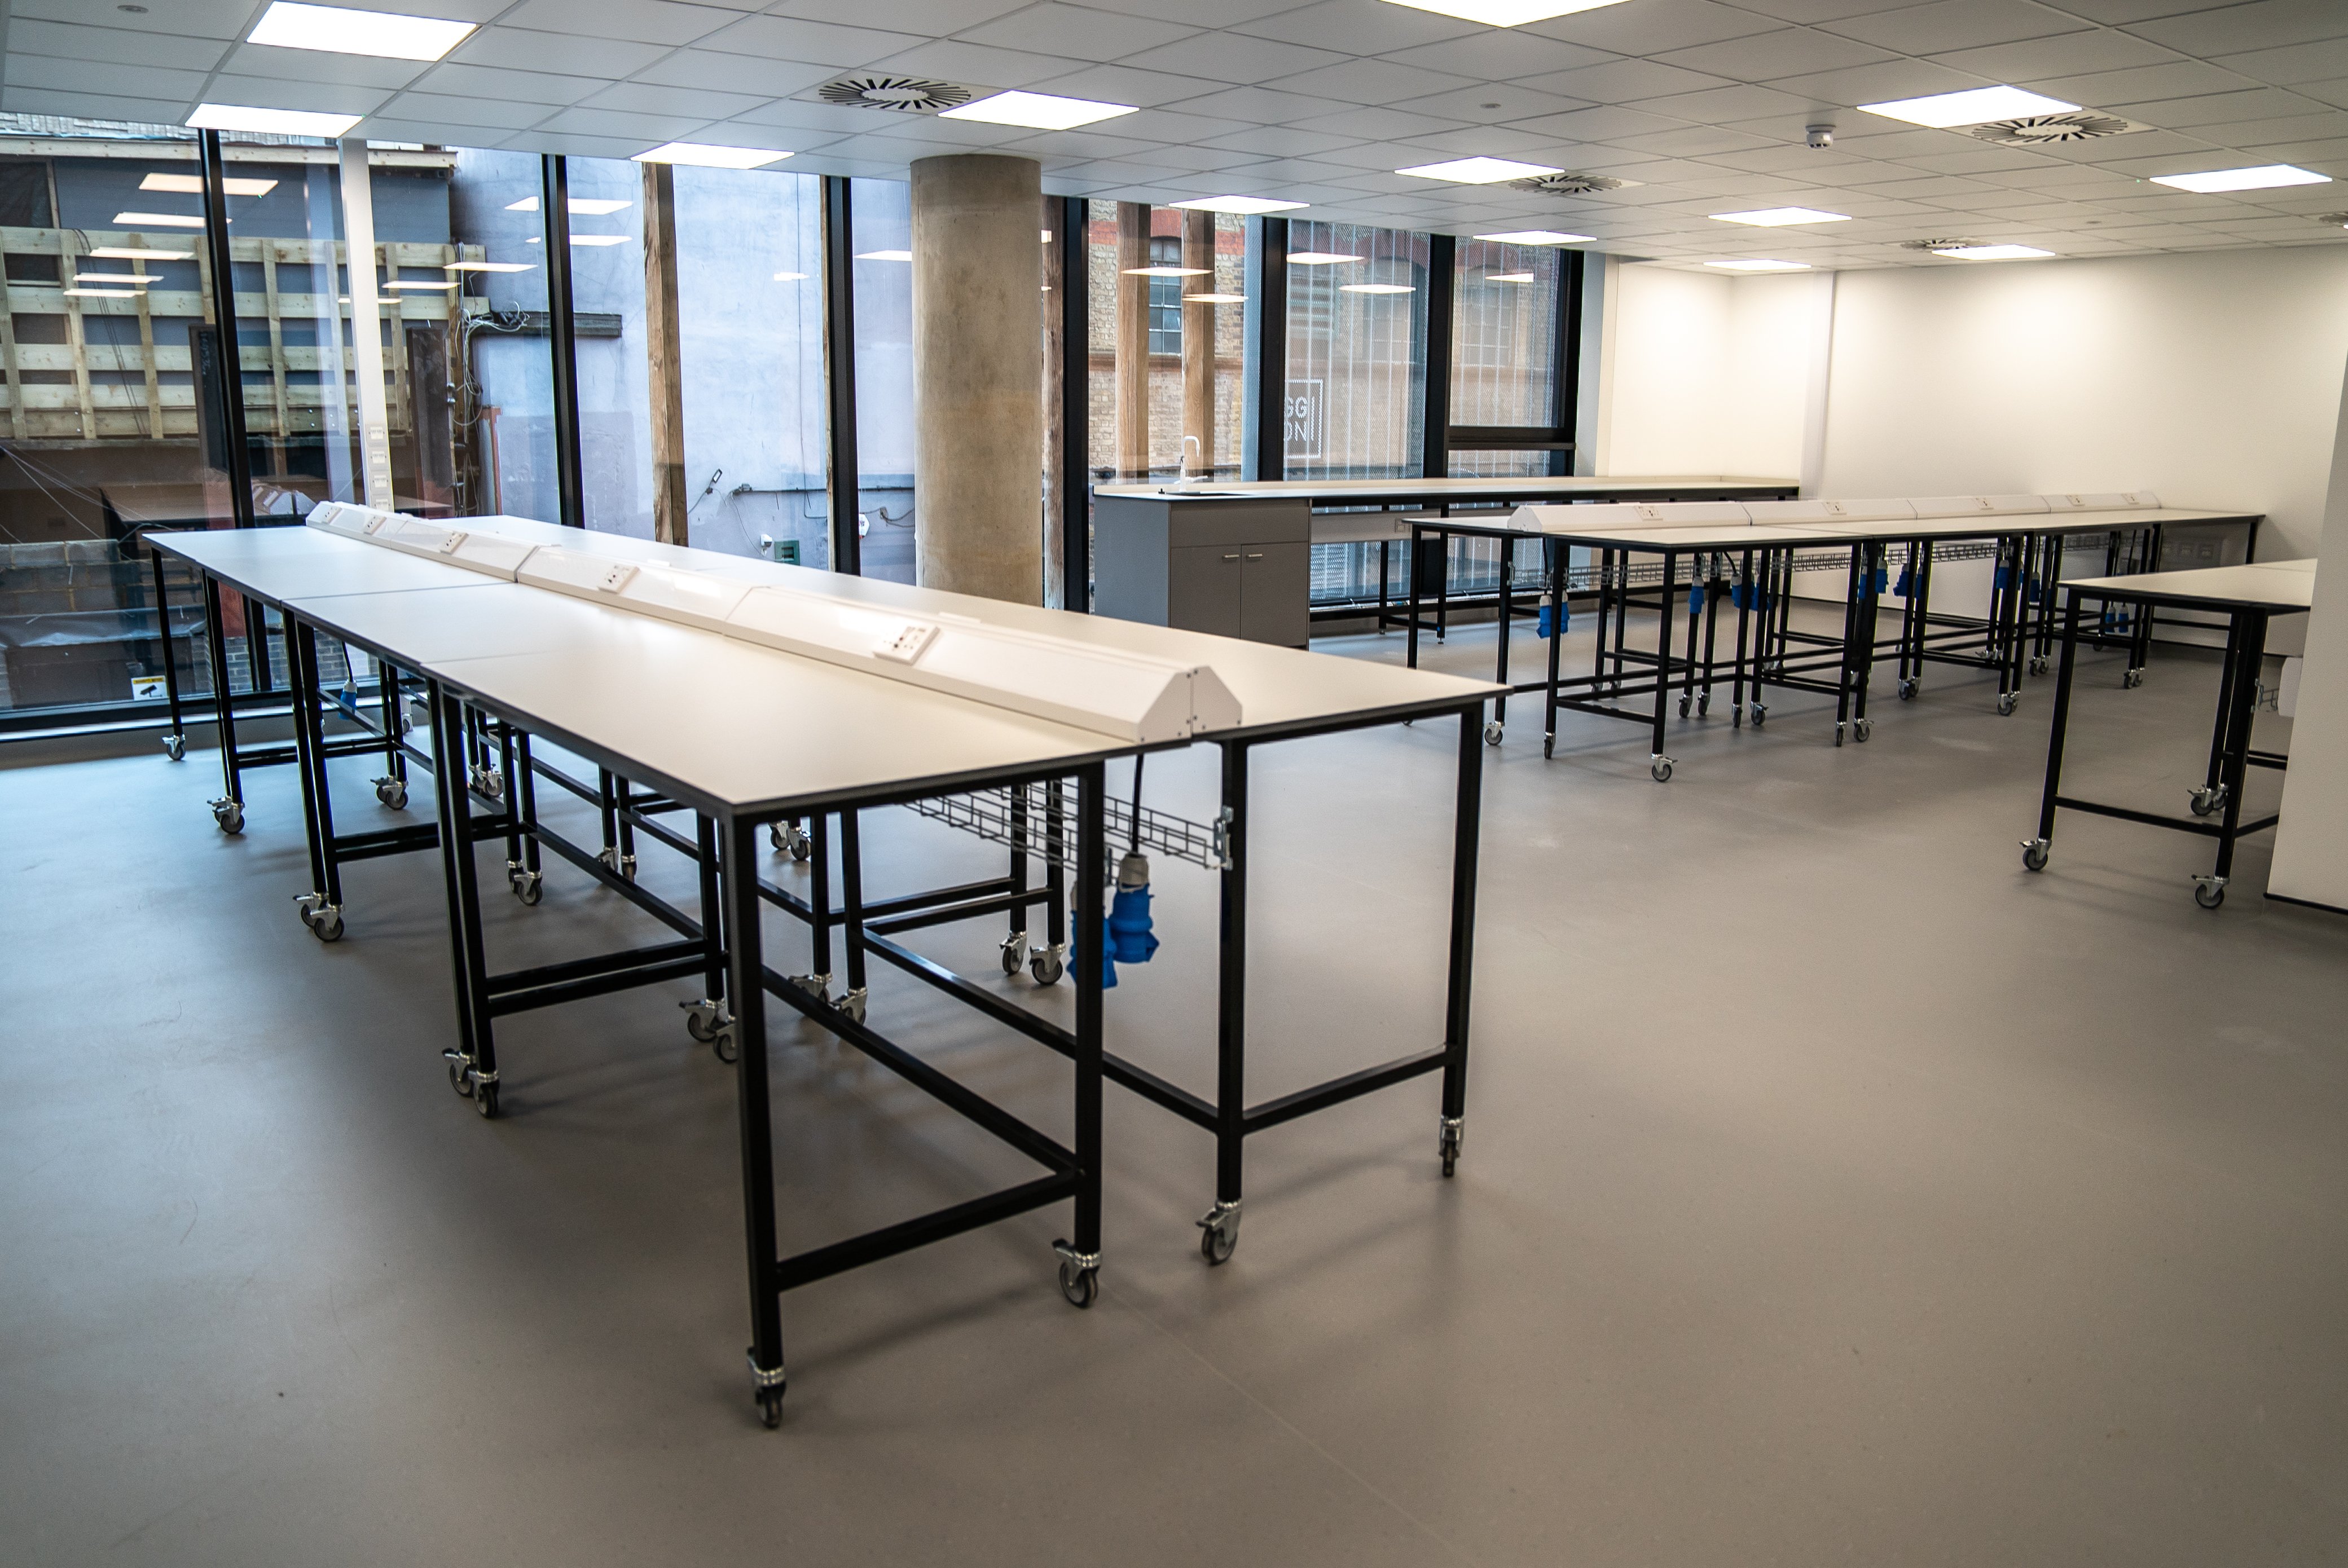 Life science design of lab with movable furniture